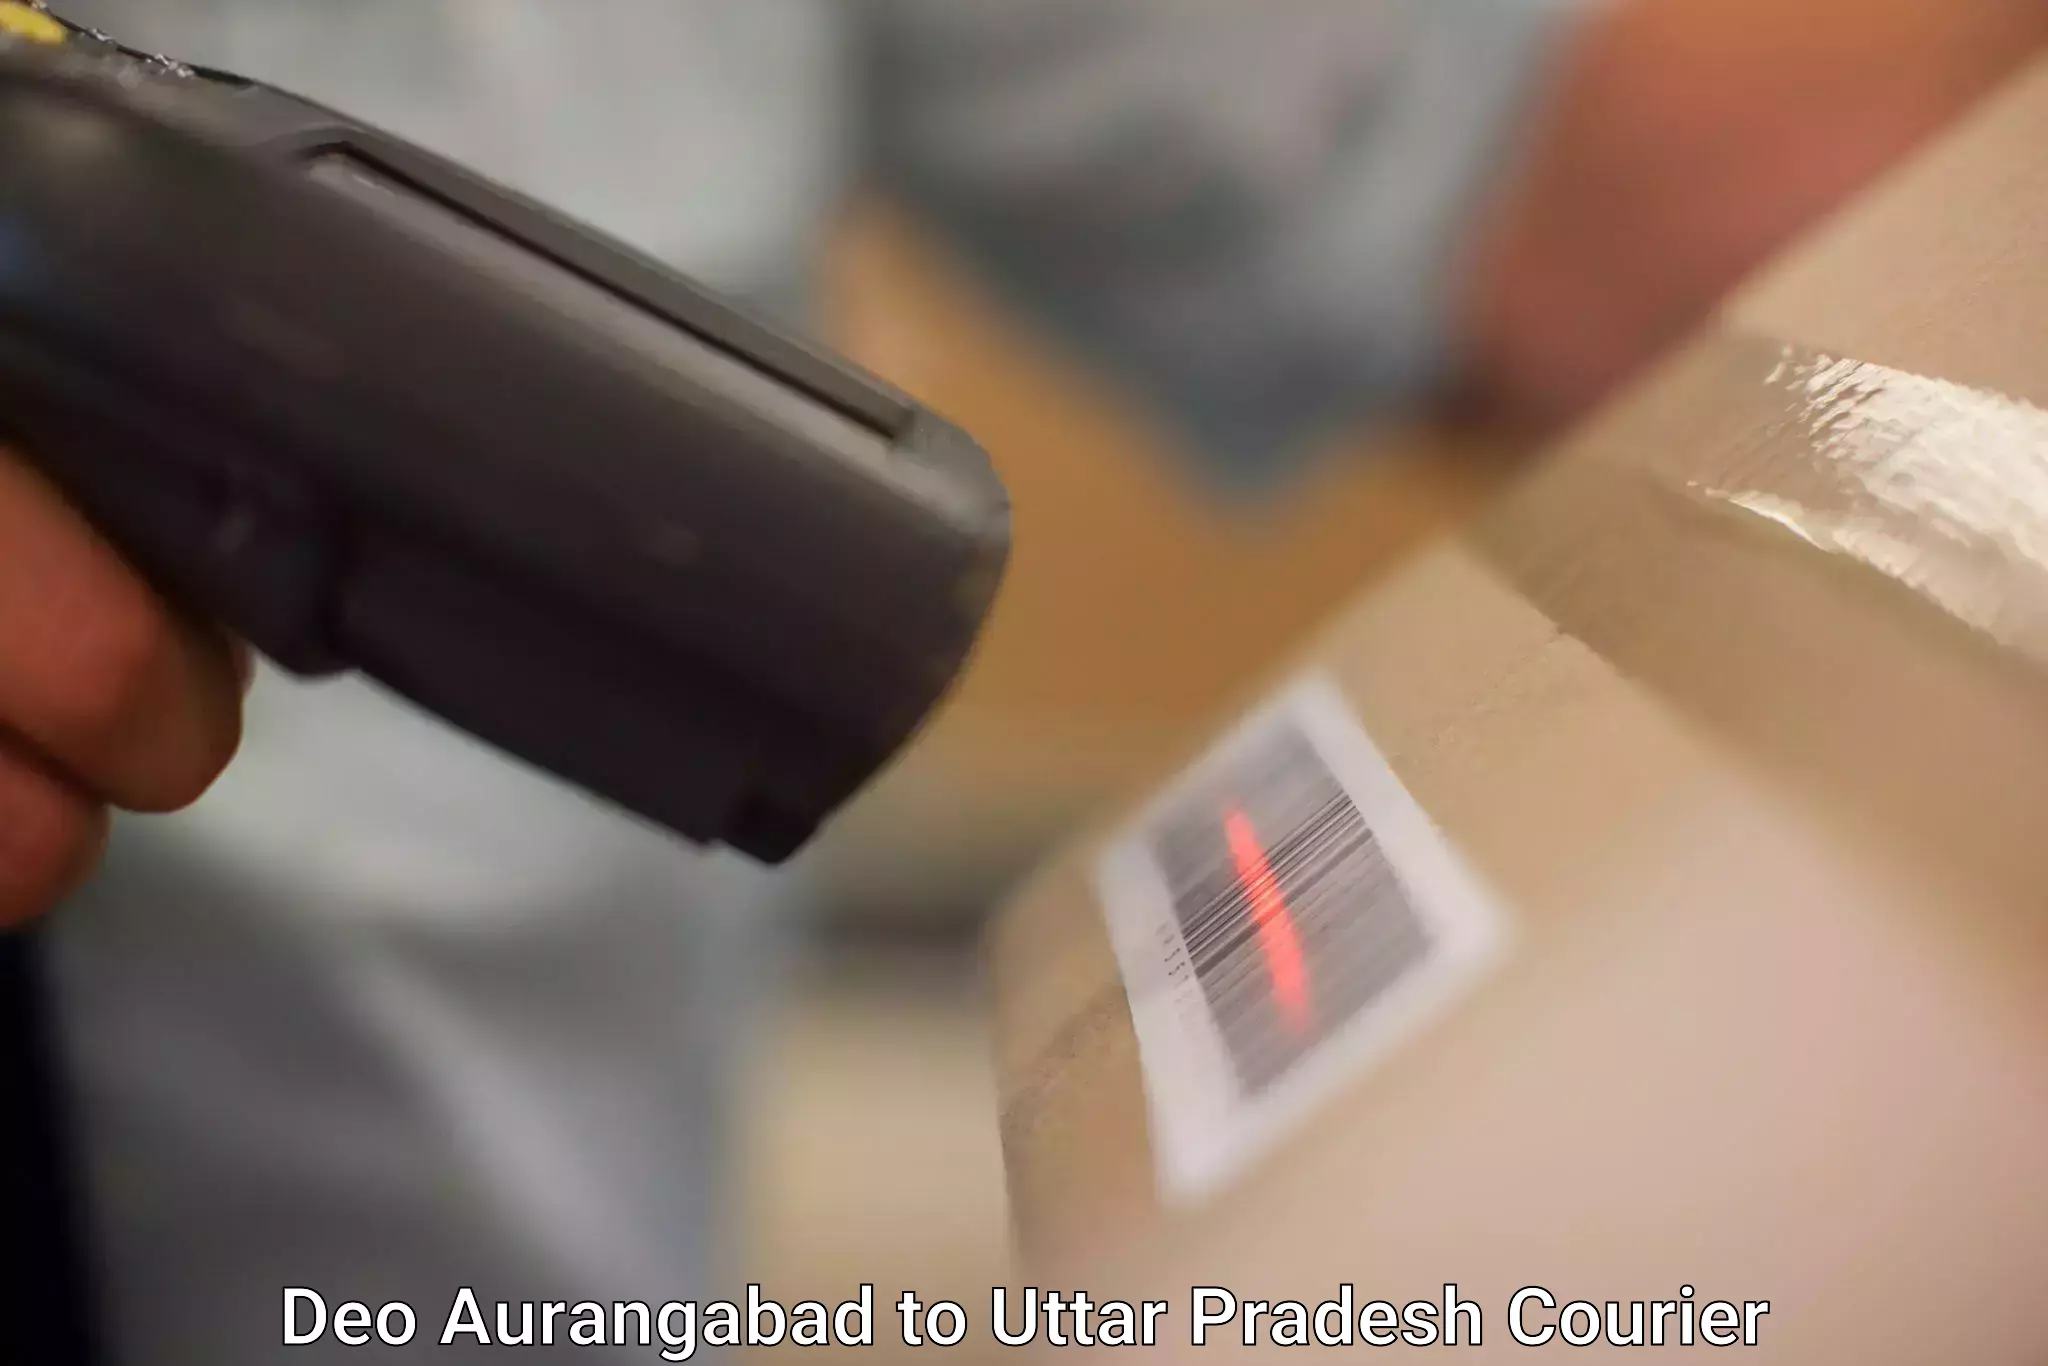 Courier service innovation Deo Aurangabad to Sultanpur Avadh